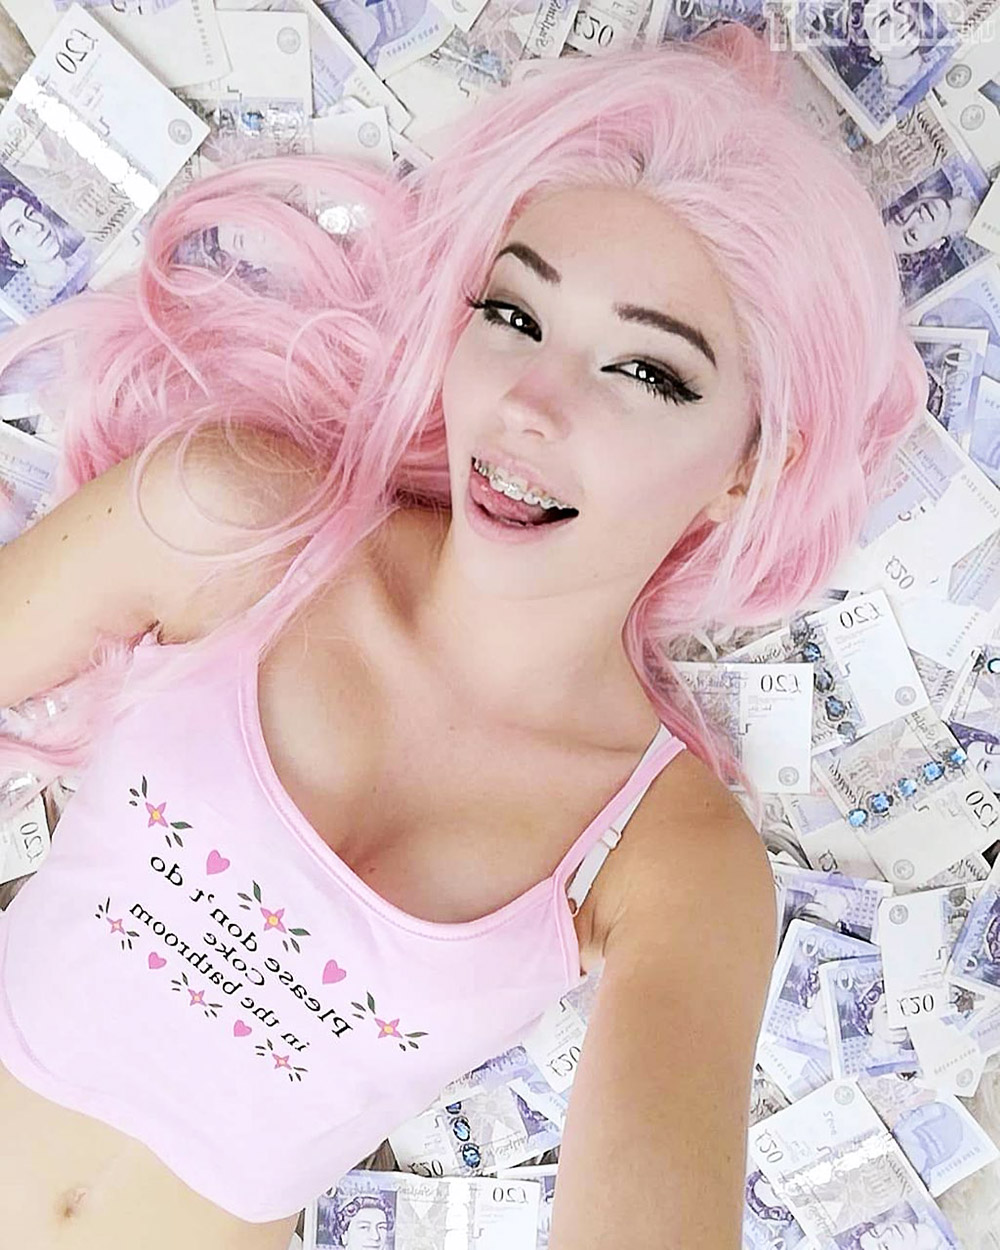 Belle Delphine is doing some weird shit, but you need to see Belle Delphine ...